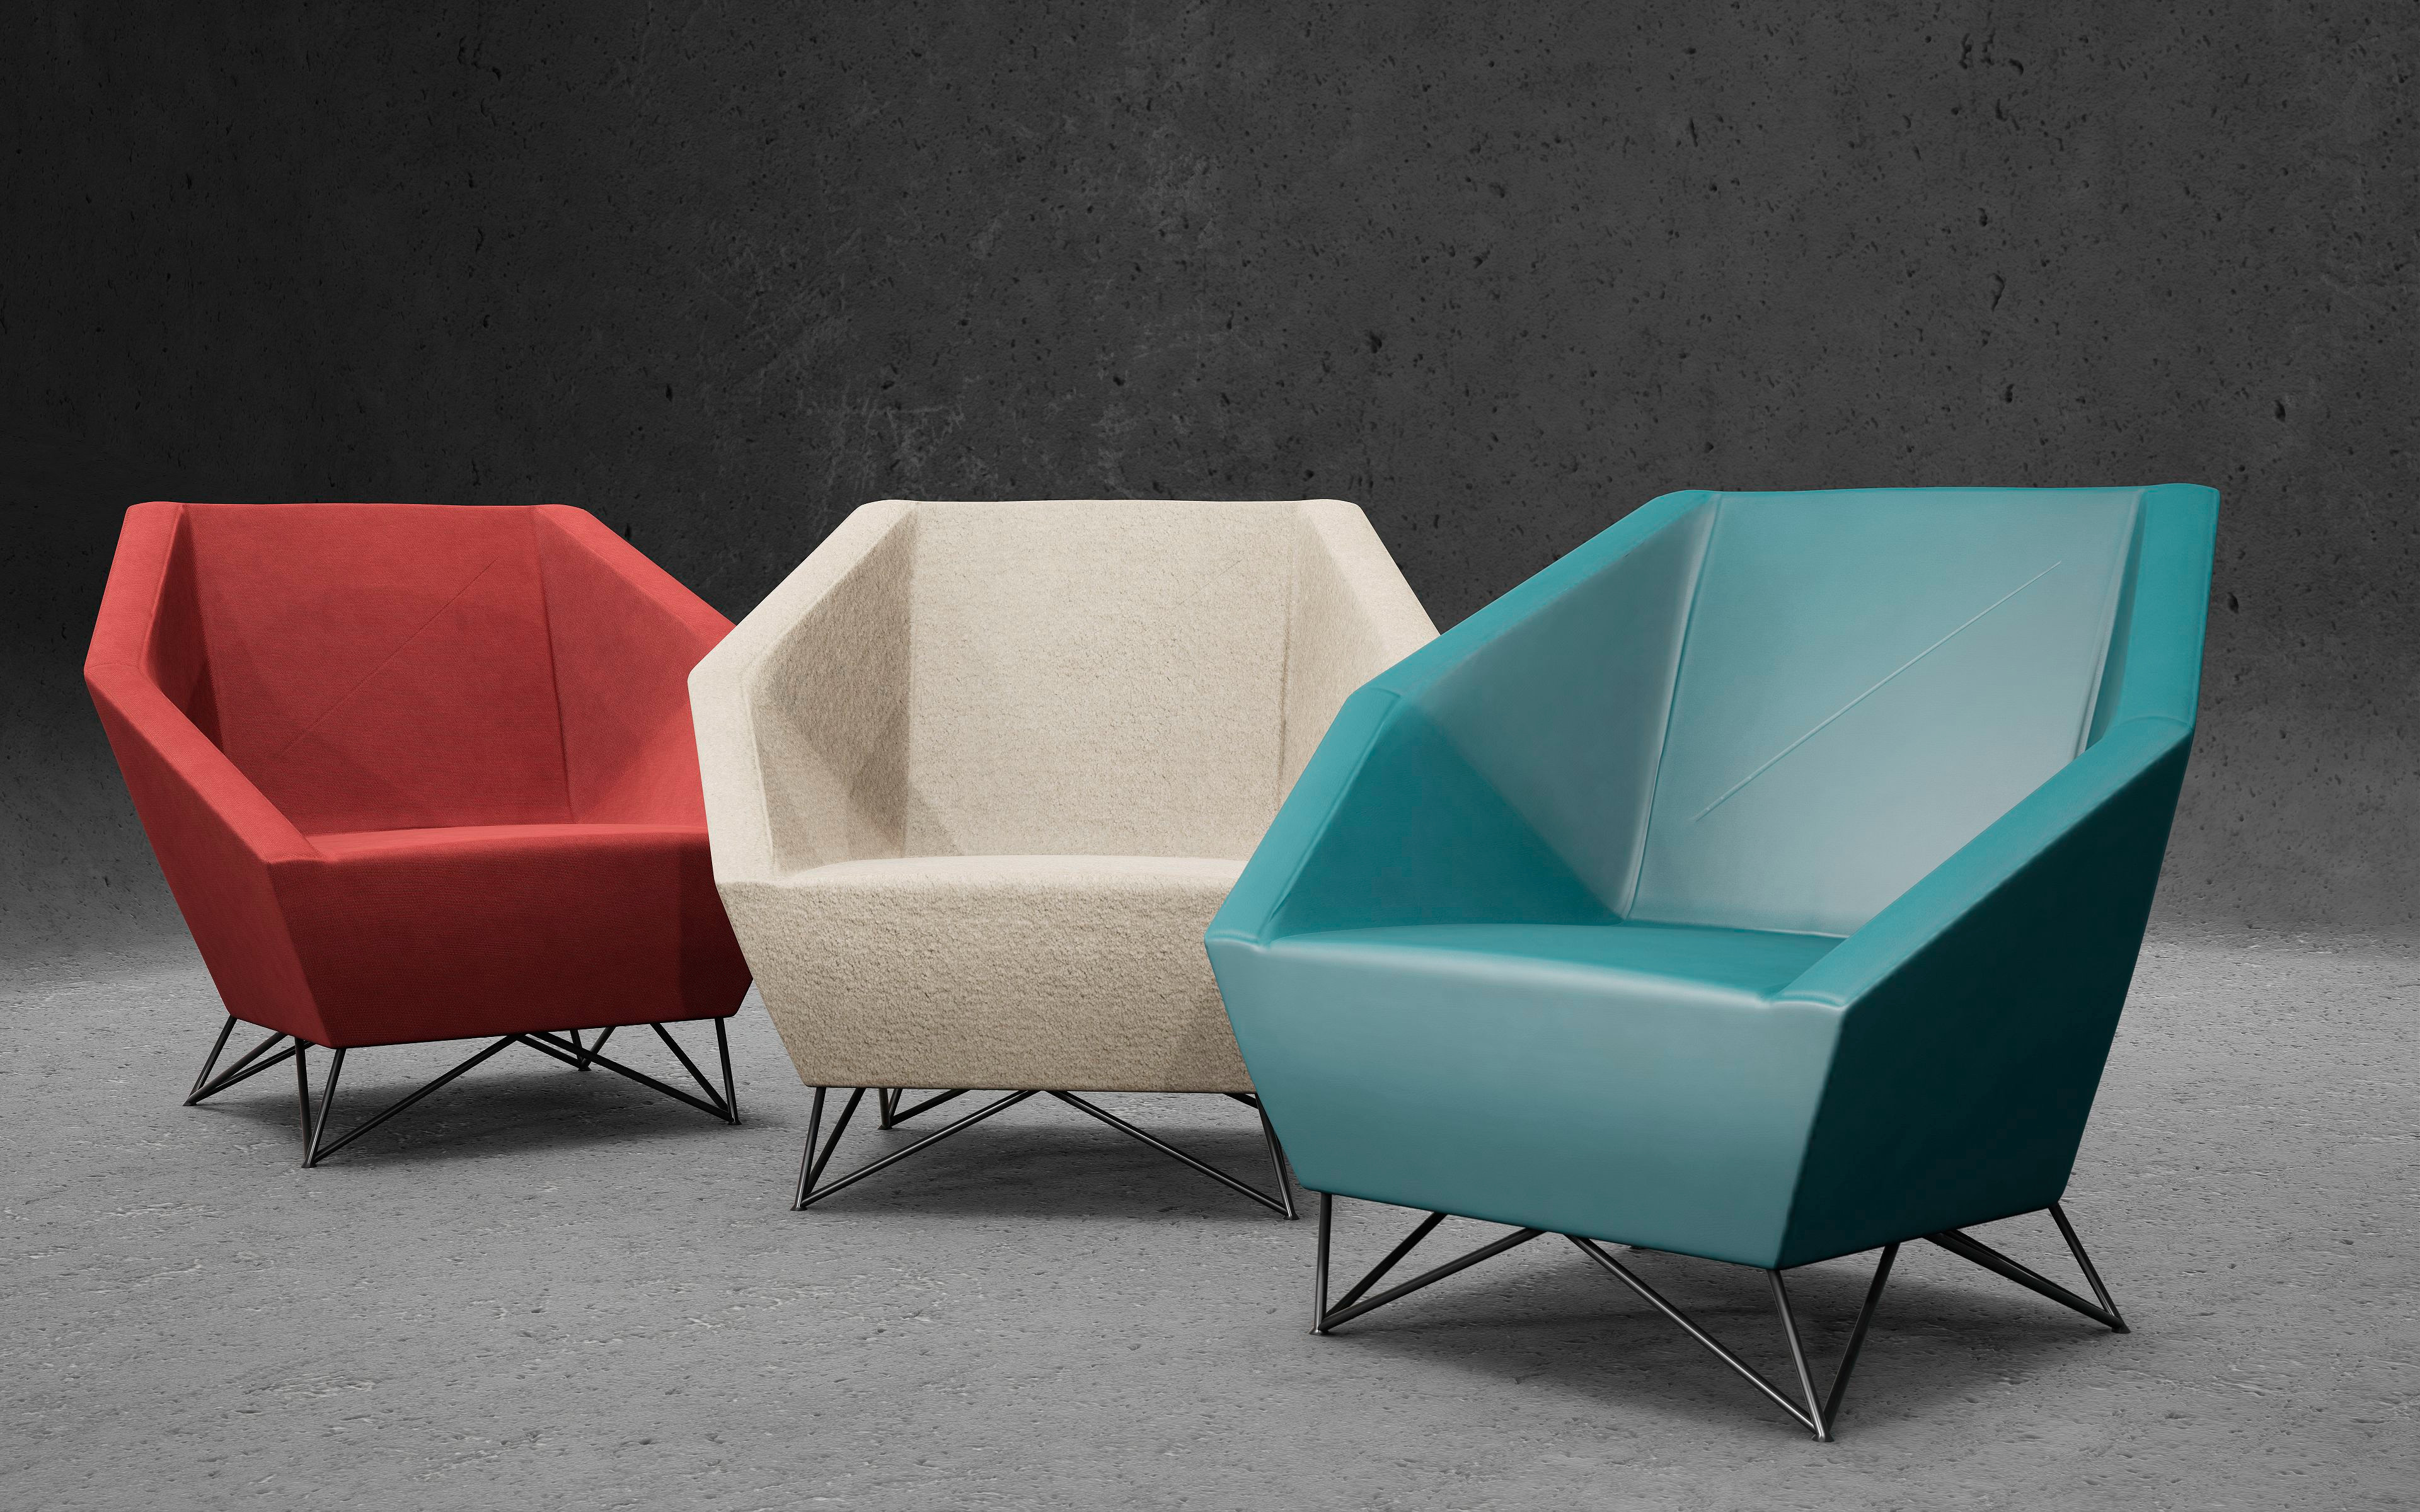 "3angle" armchairs from Prostoria designed by Grupa.
Modelled from scratch by me in Blender based on original images.
Rendered by me in UE4.